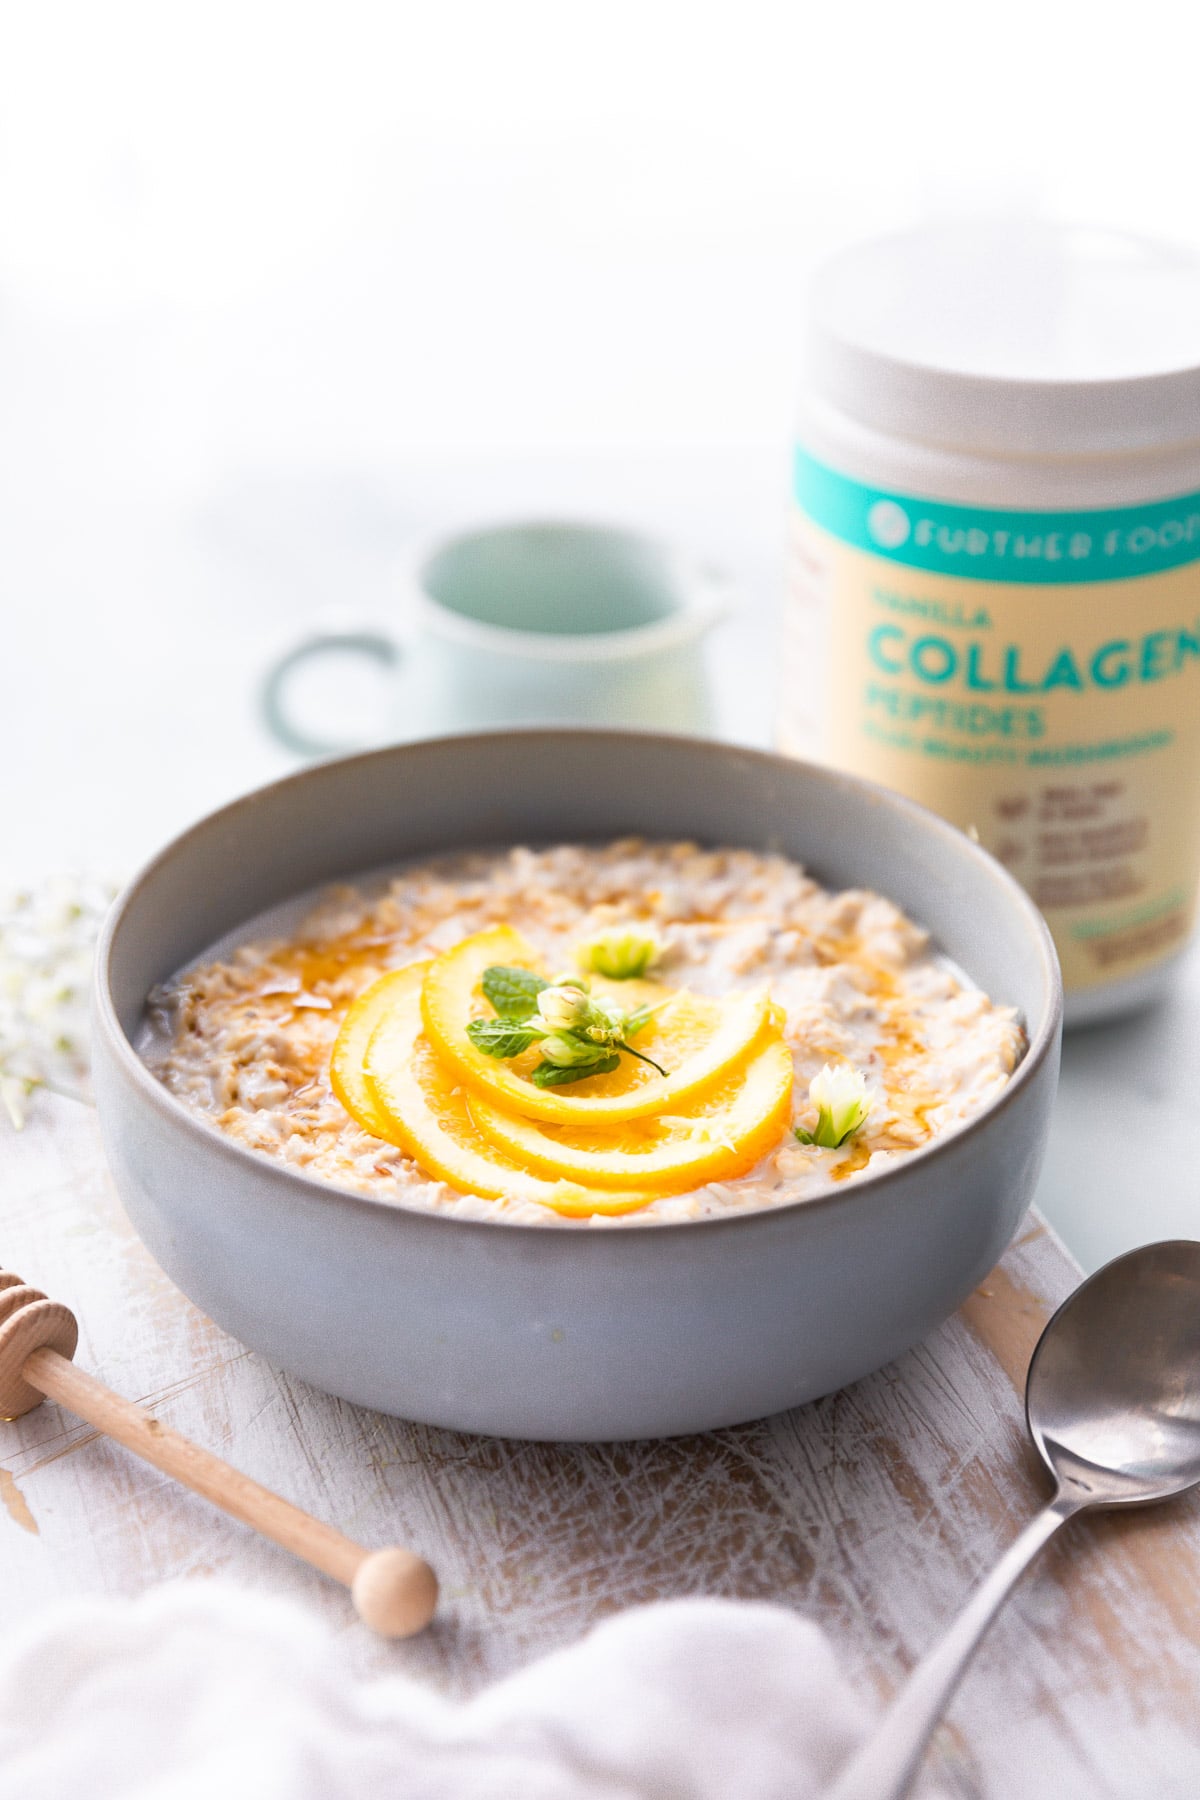 overnight oats in stone bowl topped with fresh orange slices with collagen container and cup of coffee in background.